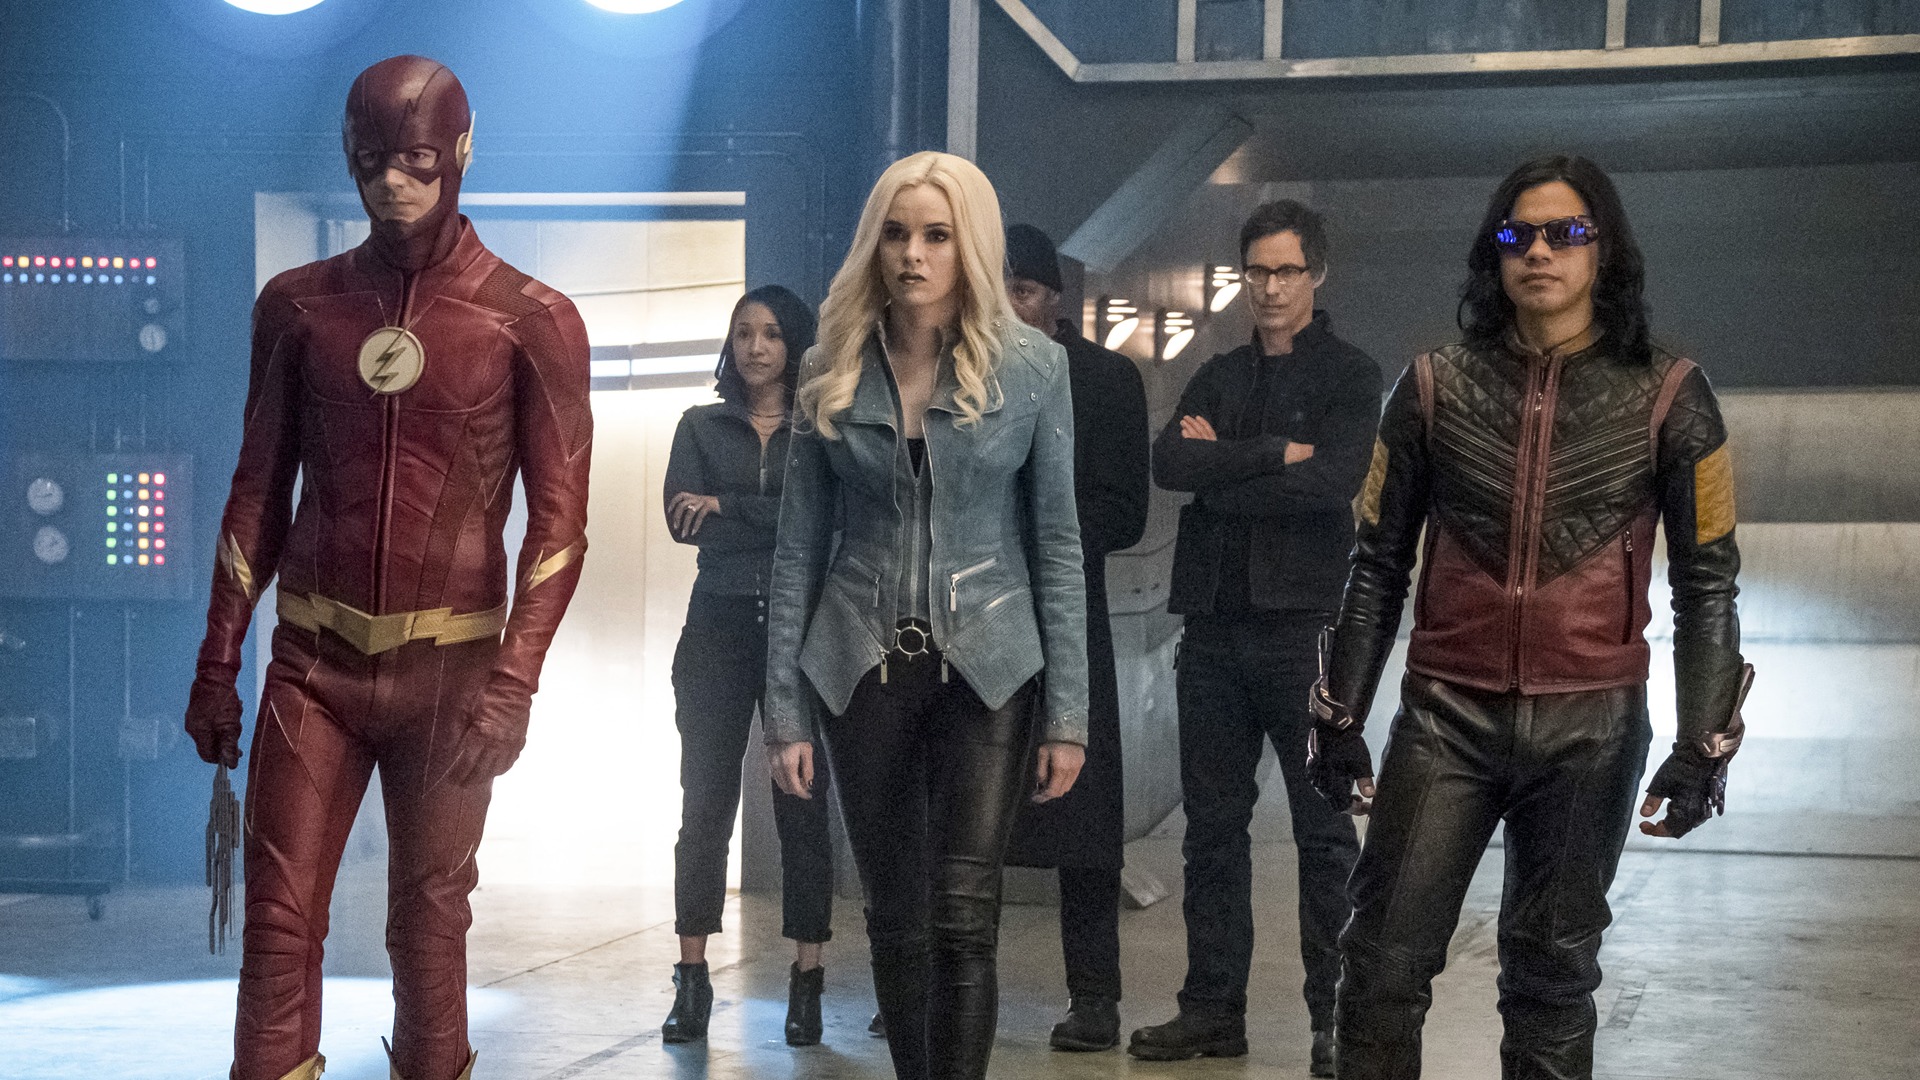 The Flash Season 5 Episode 20: here is what you can expect